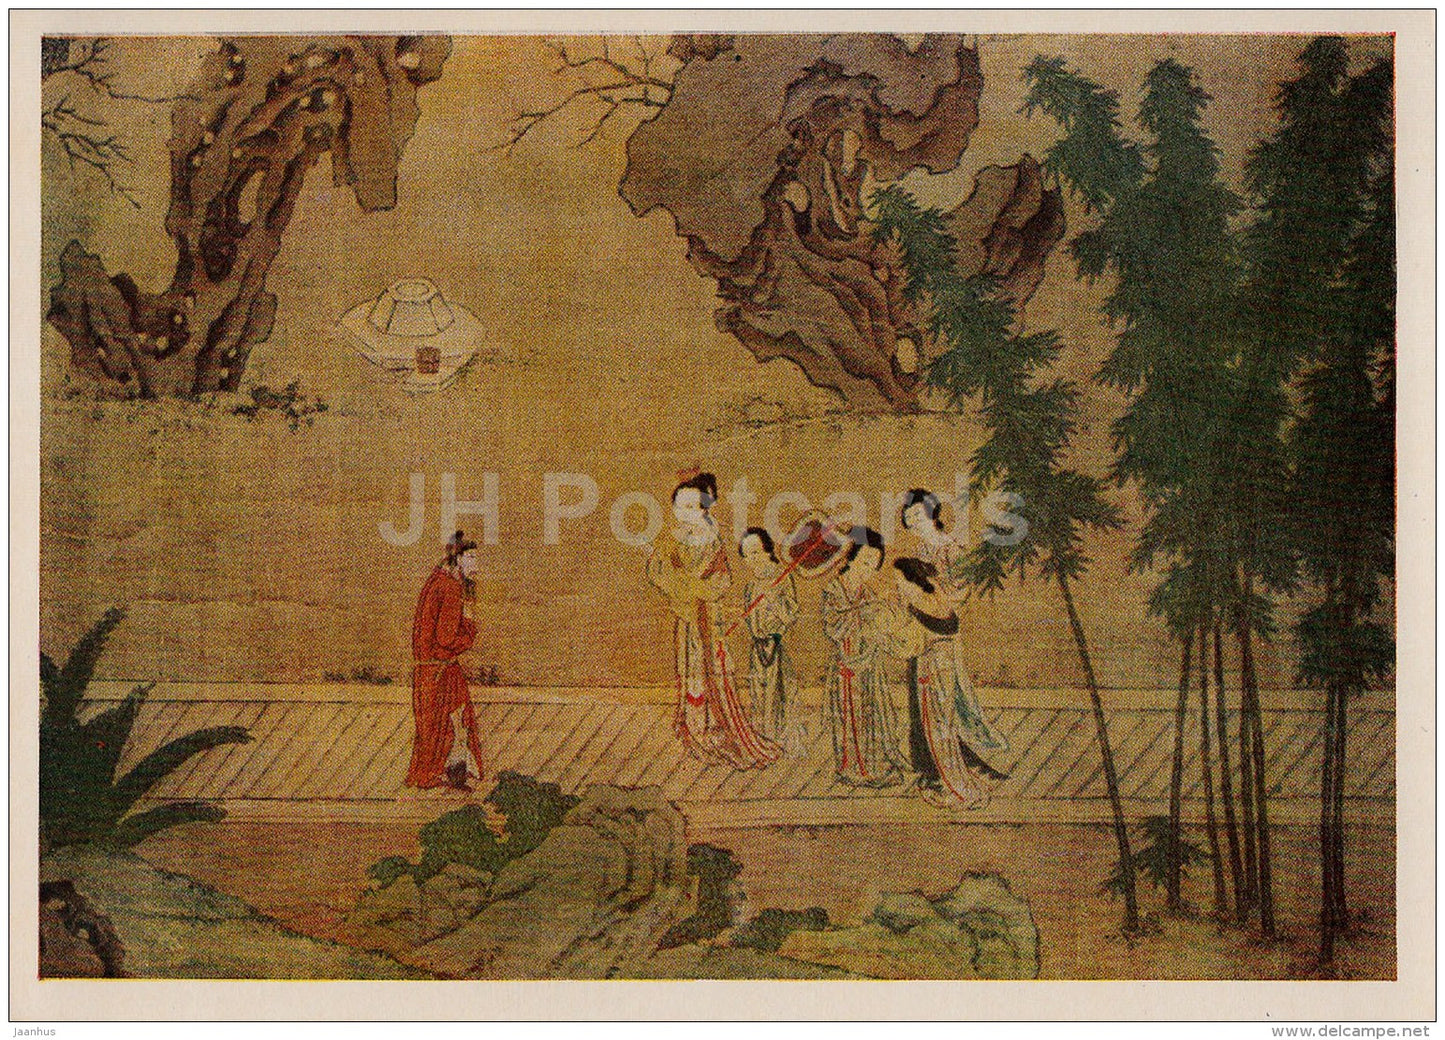 Painting by Qiu Ying - Poem of the abandoned wife - Chinese art - 1956 - Russia USSR - unused - JH Postcards